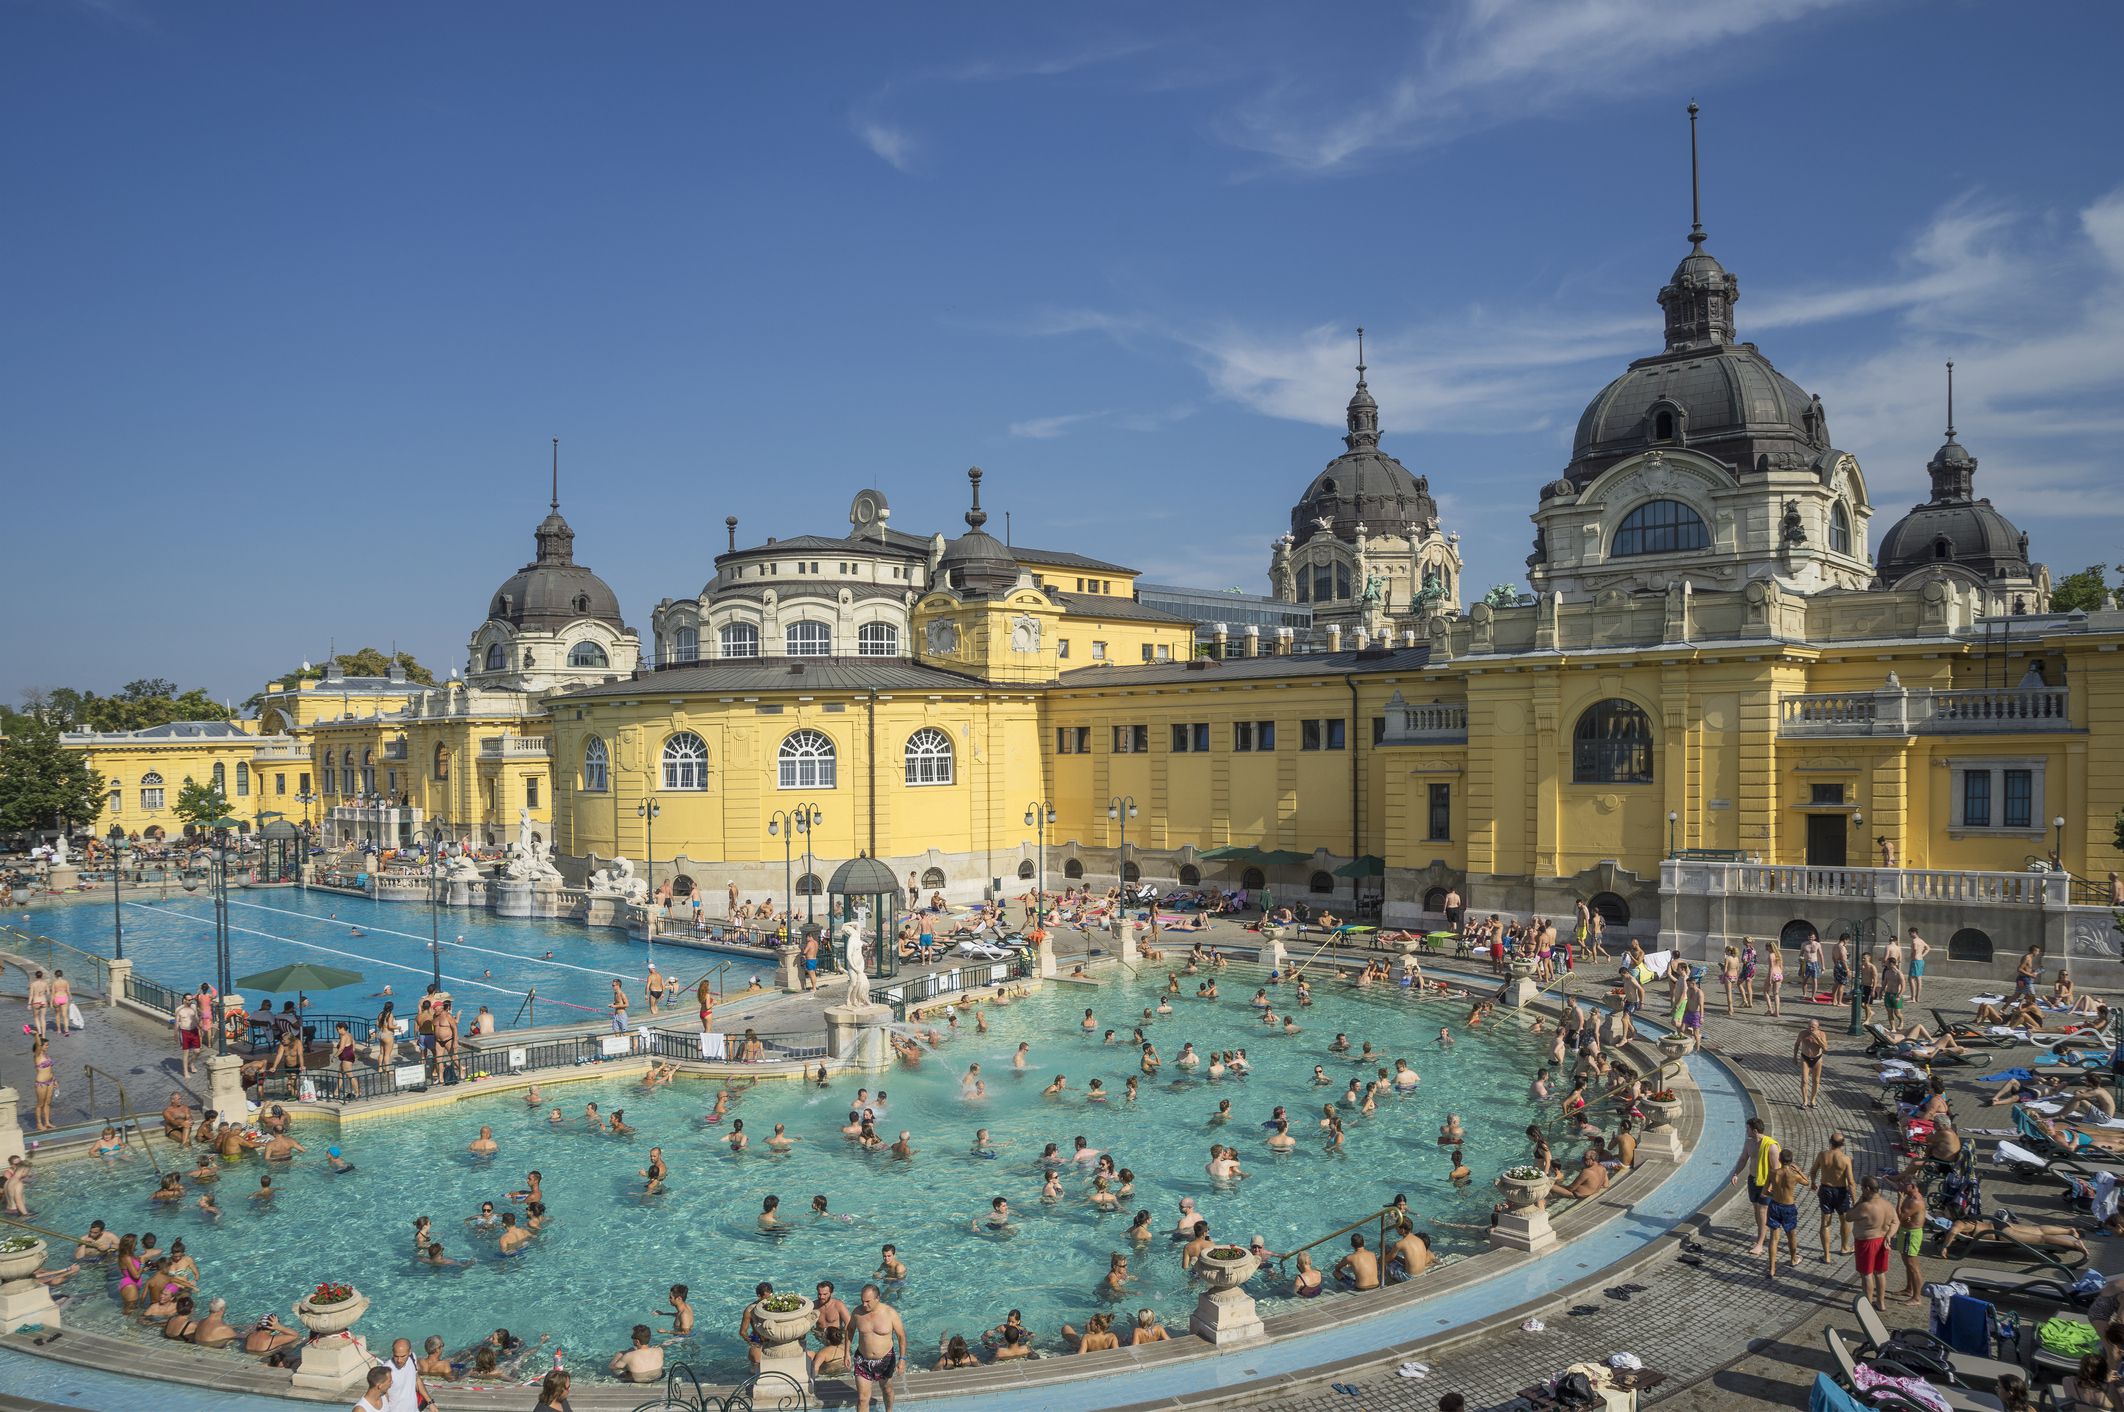 The Best Thermal Baths to Visit in Budapest